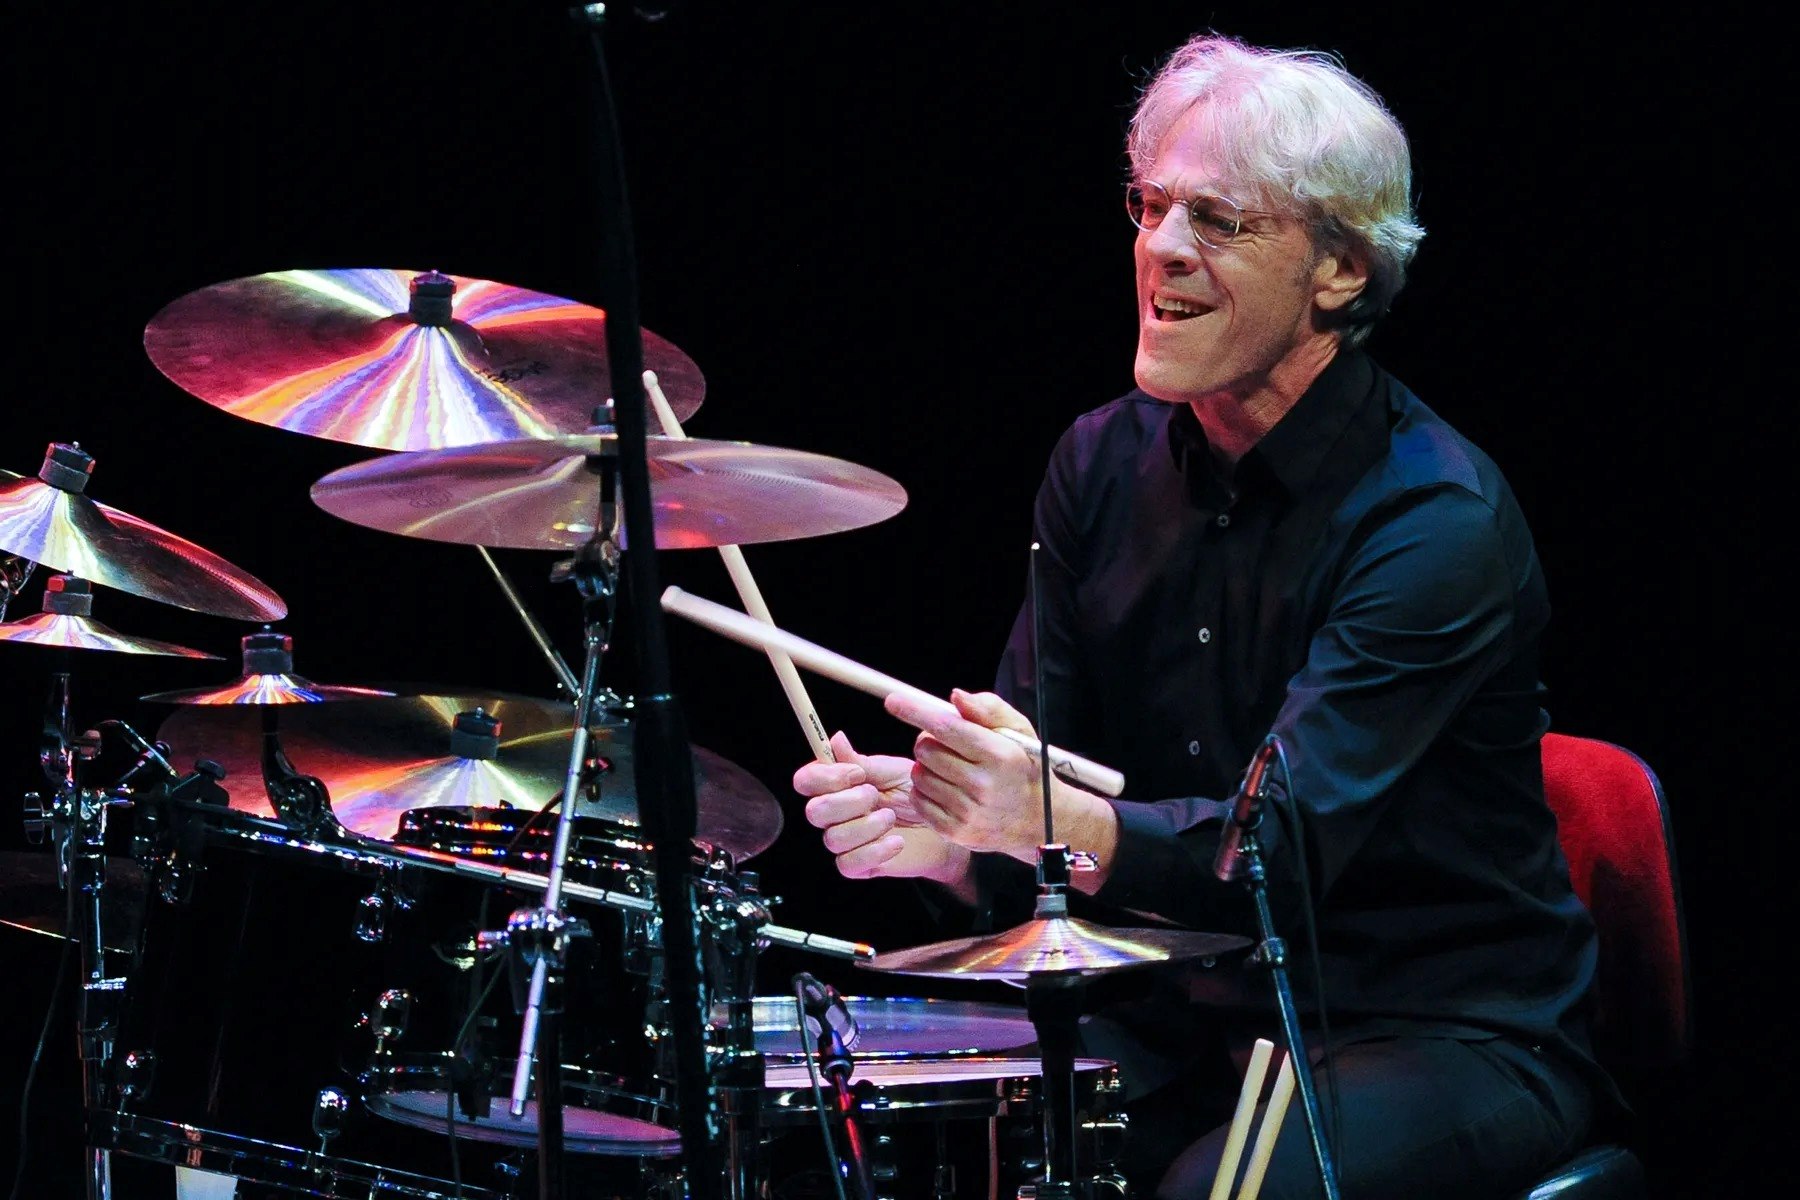 19 Fascinating Facts About Stewart Copeland - Facts.net